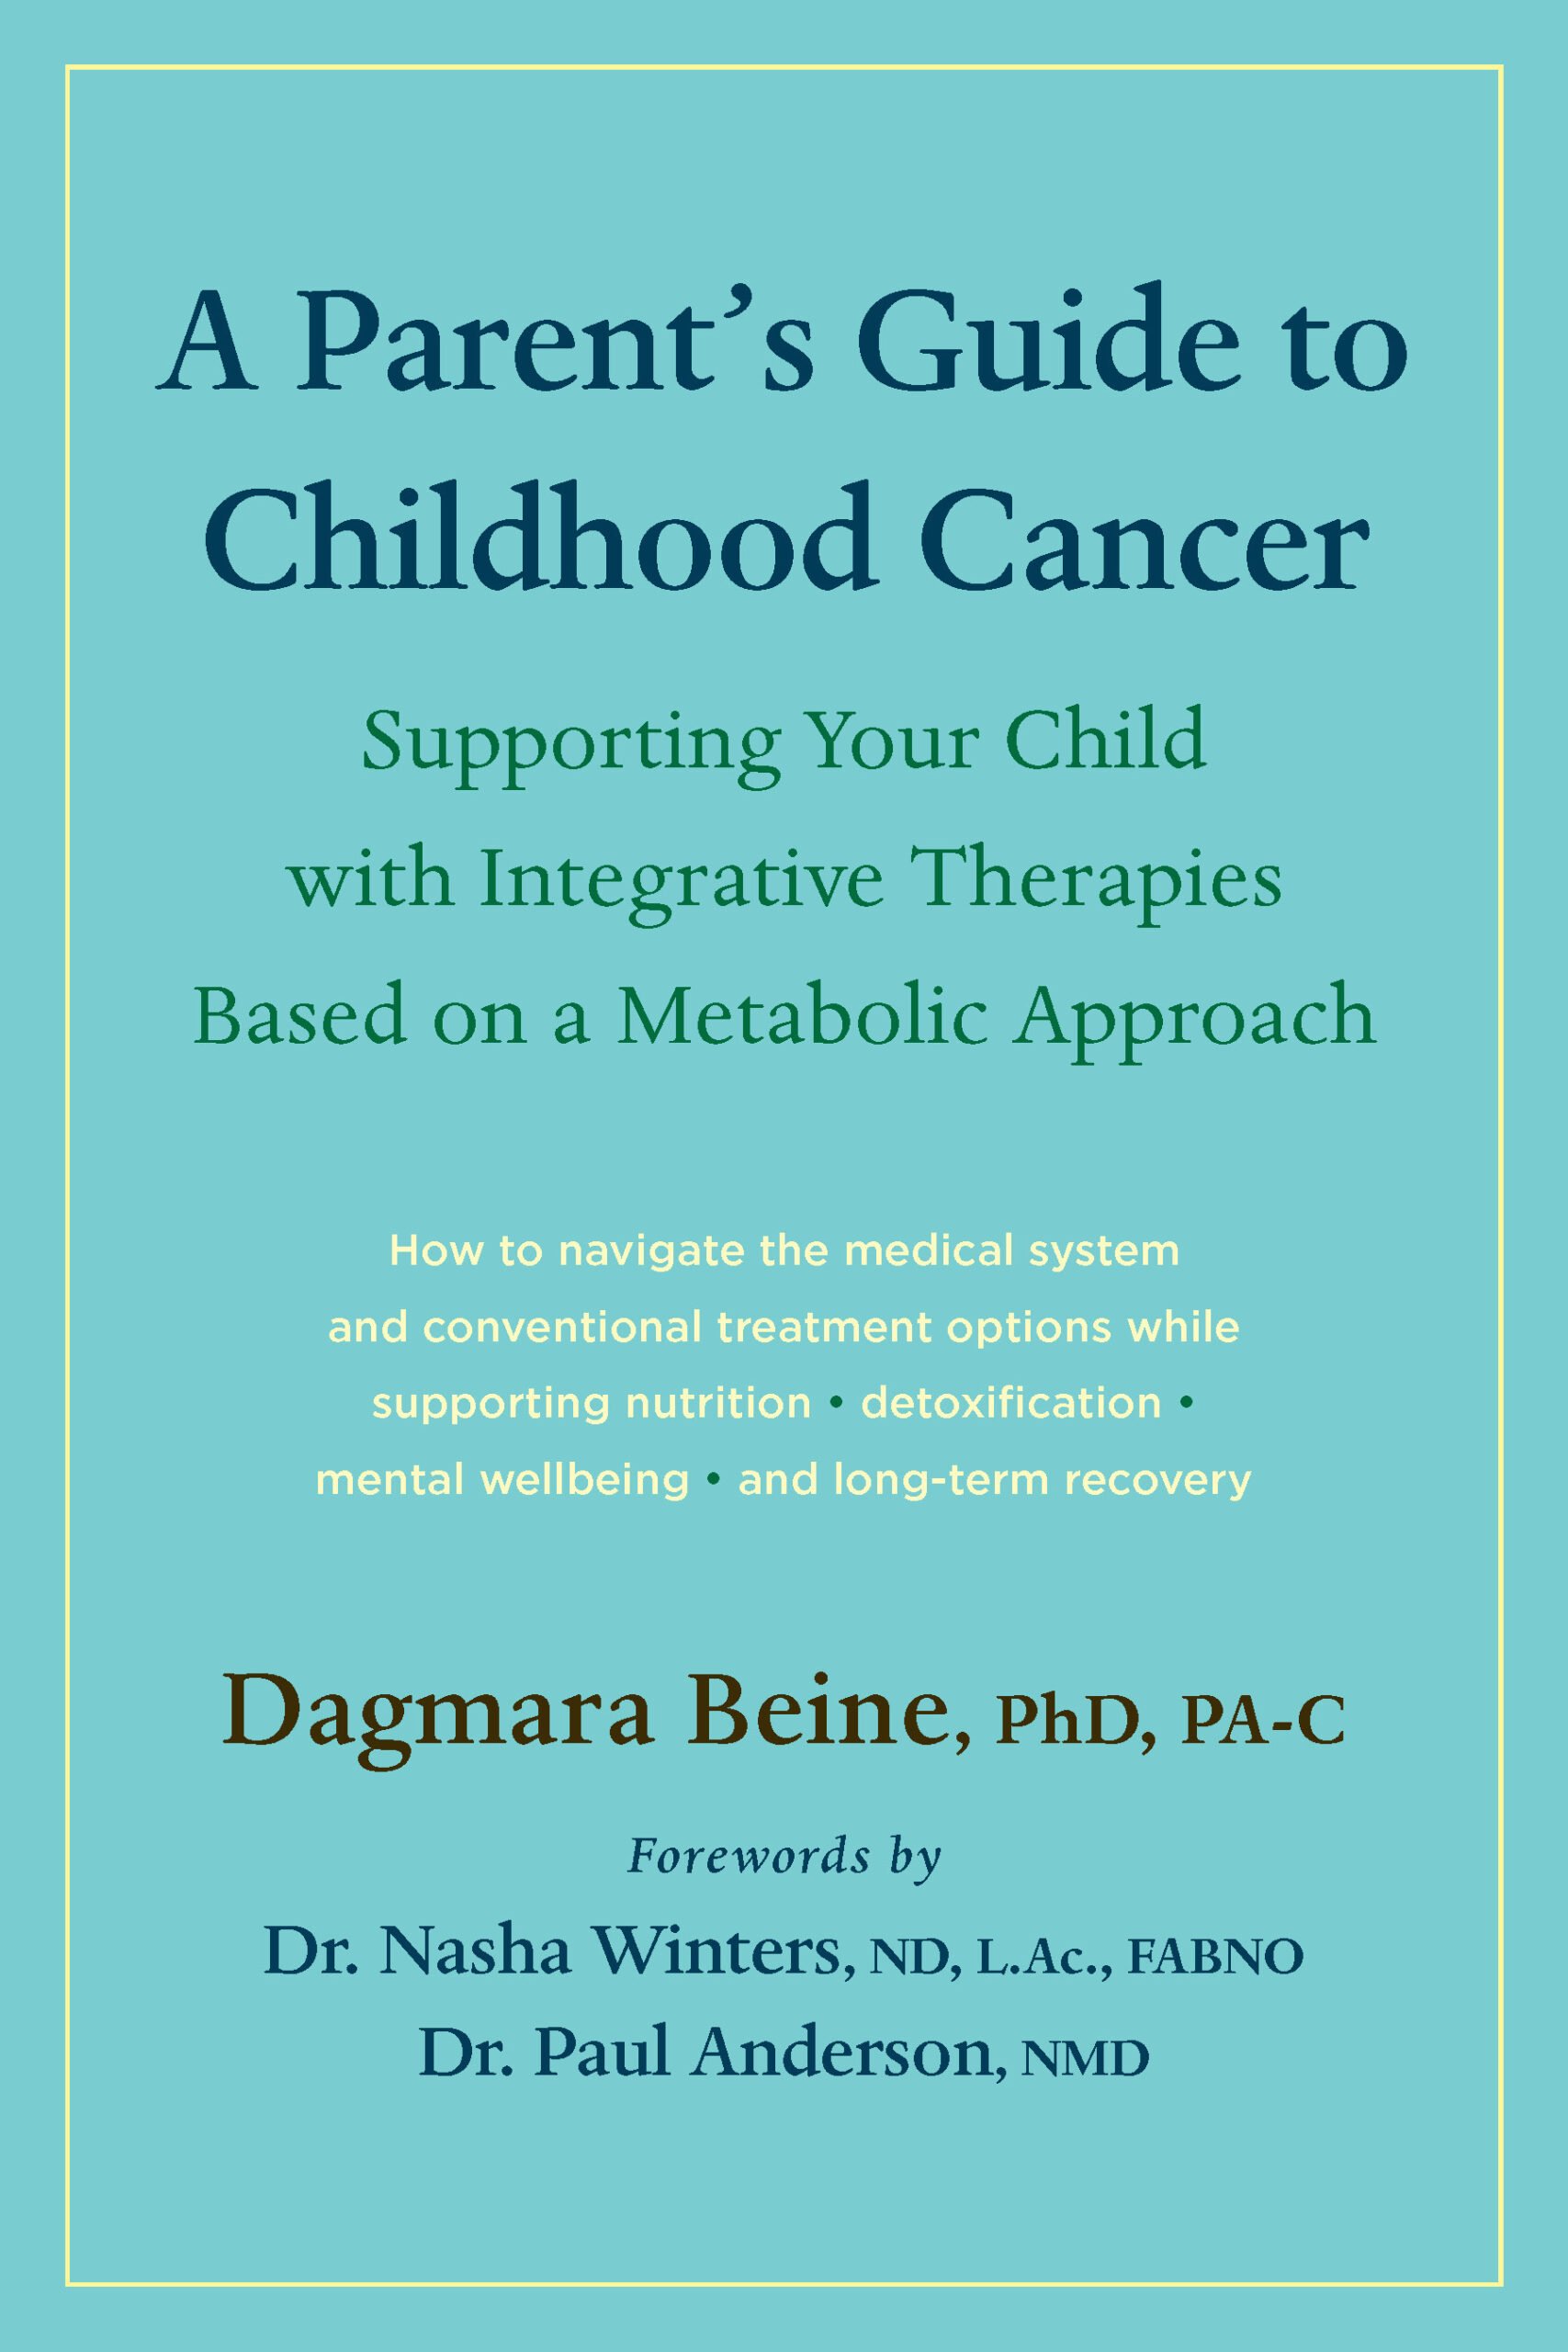 The Parent’s Guide to Childhood Cancer cover